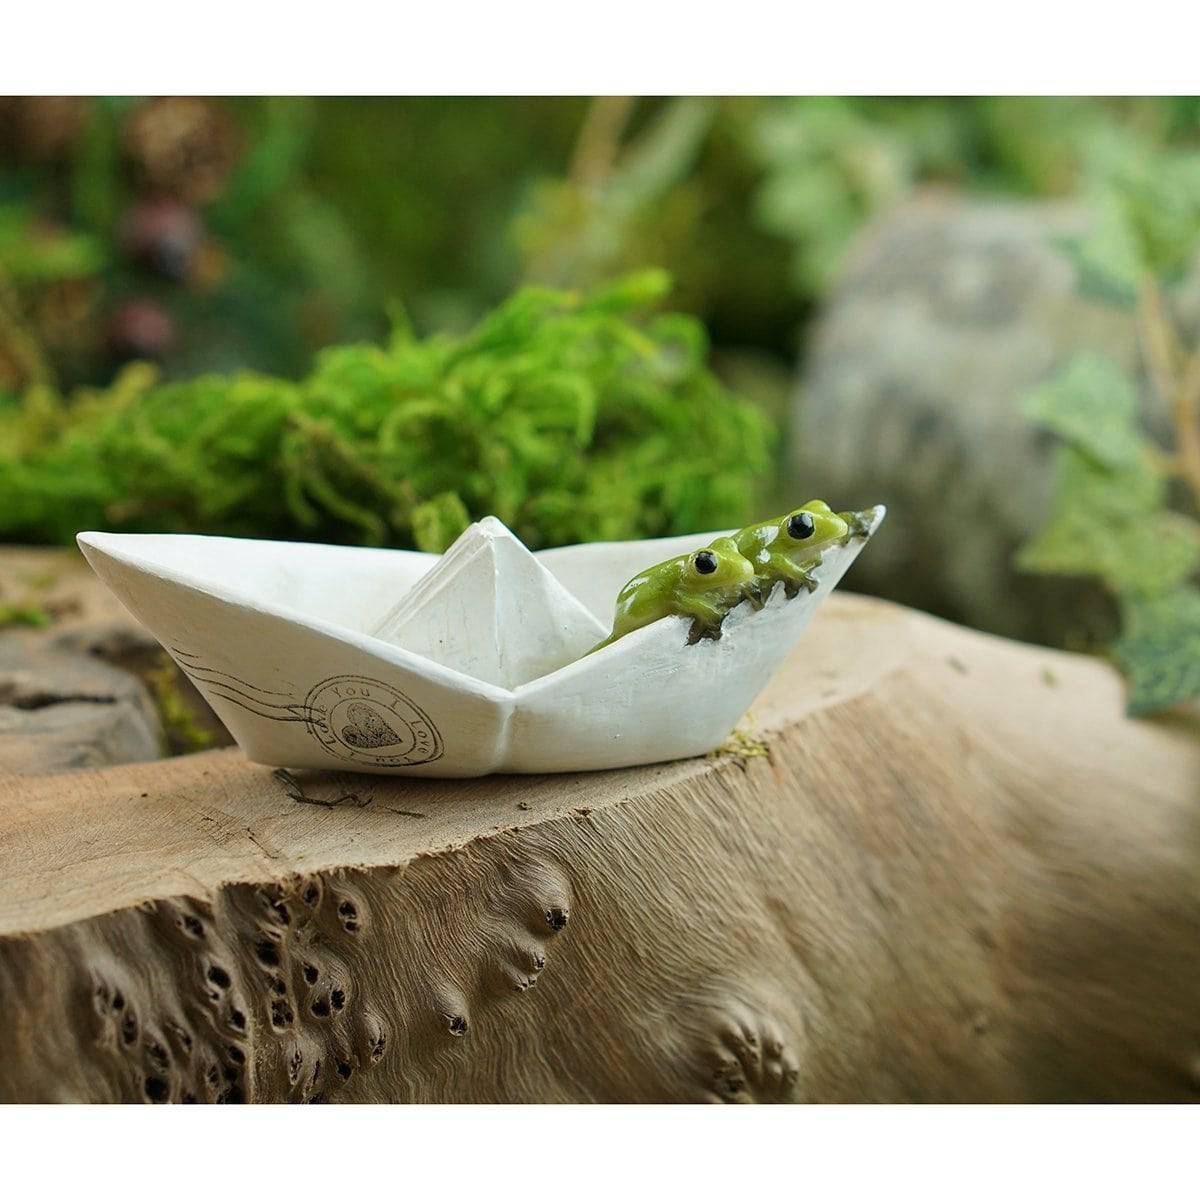 Sealed with Love Frog on Paper Boat, Fairy Garden, Fairy Frog, Mini Frog, Miniature Frog - Mini Fairy Garden World